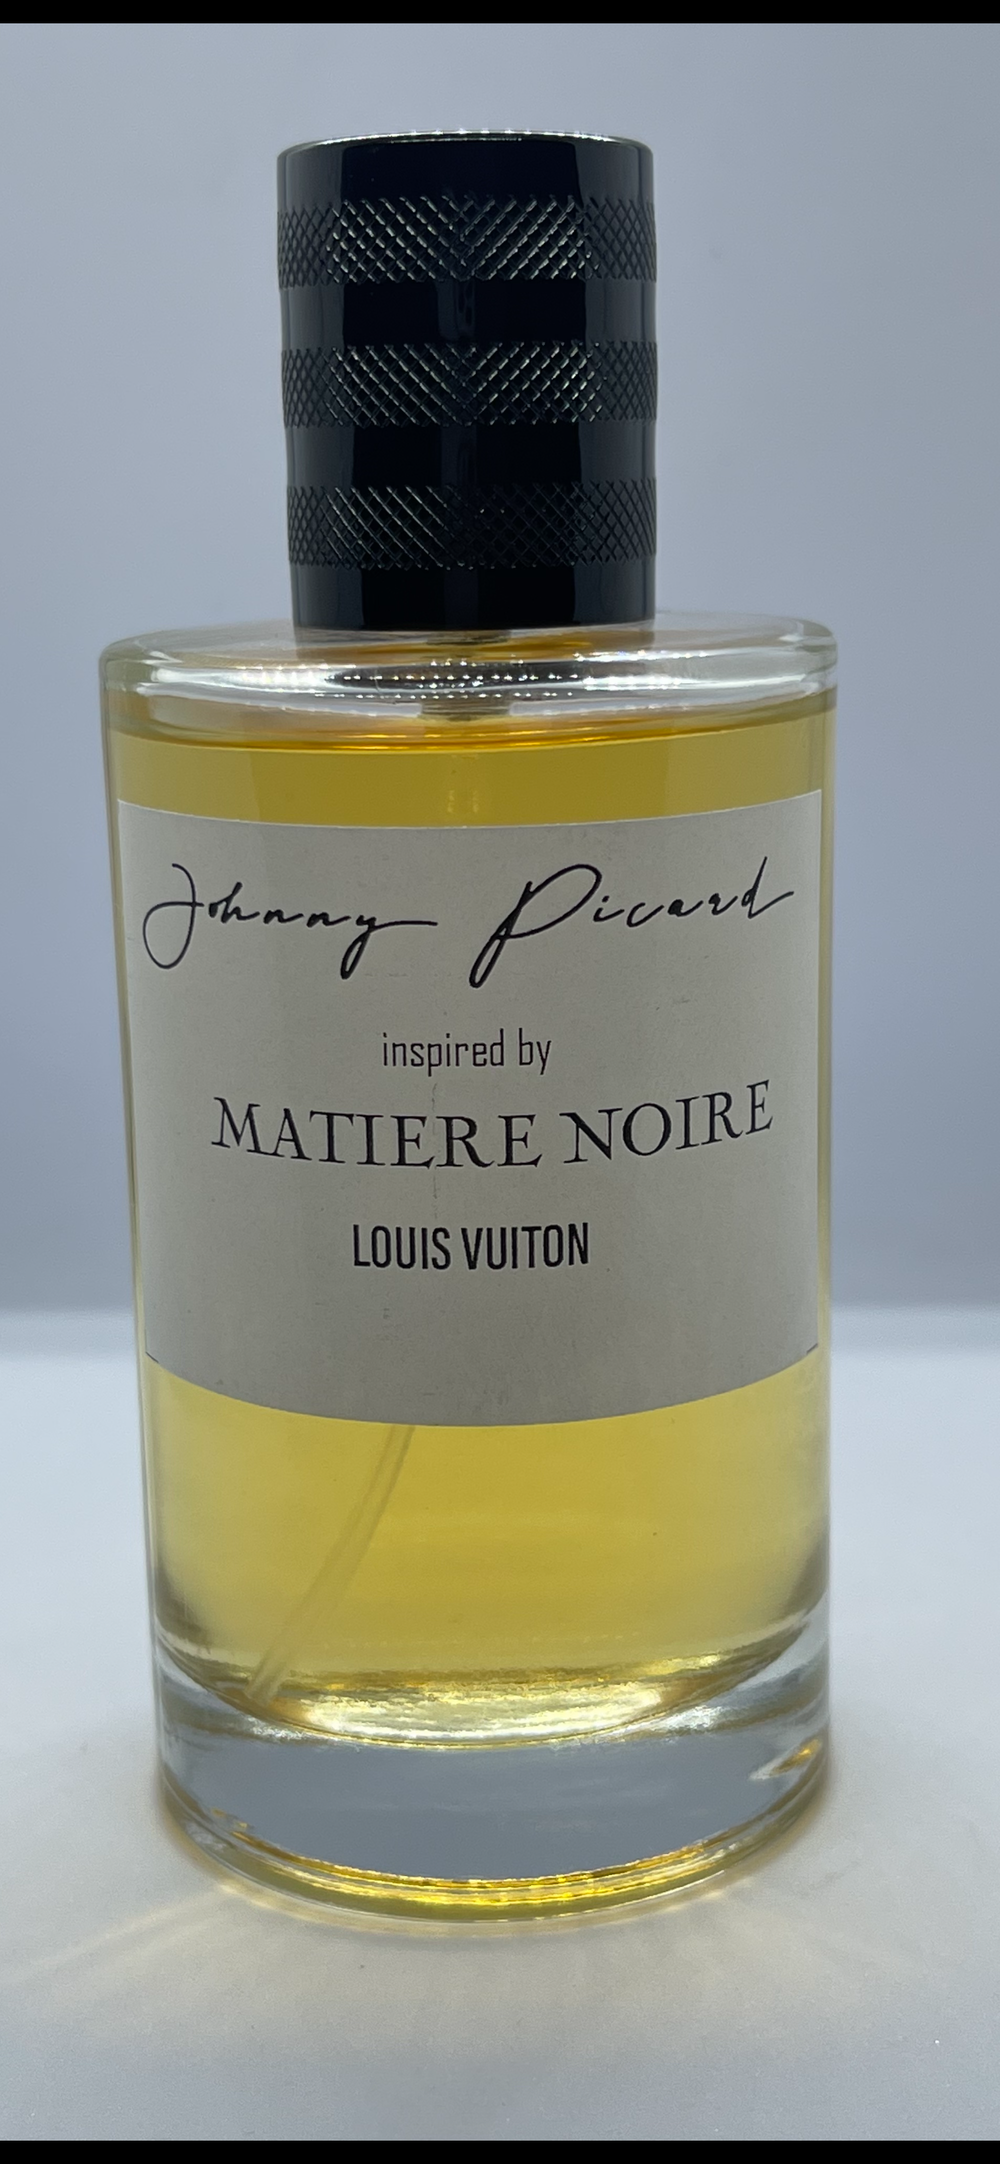 Johnny Picard inspired by Matiere Noire  LOUIS VUITTON